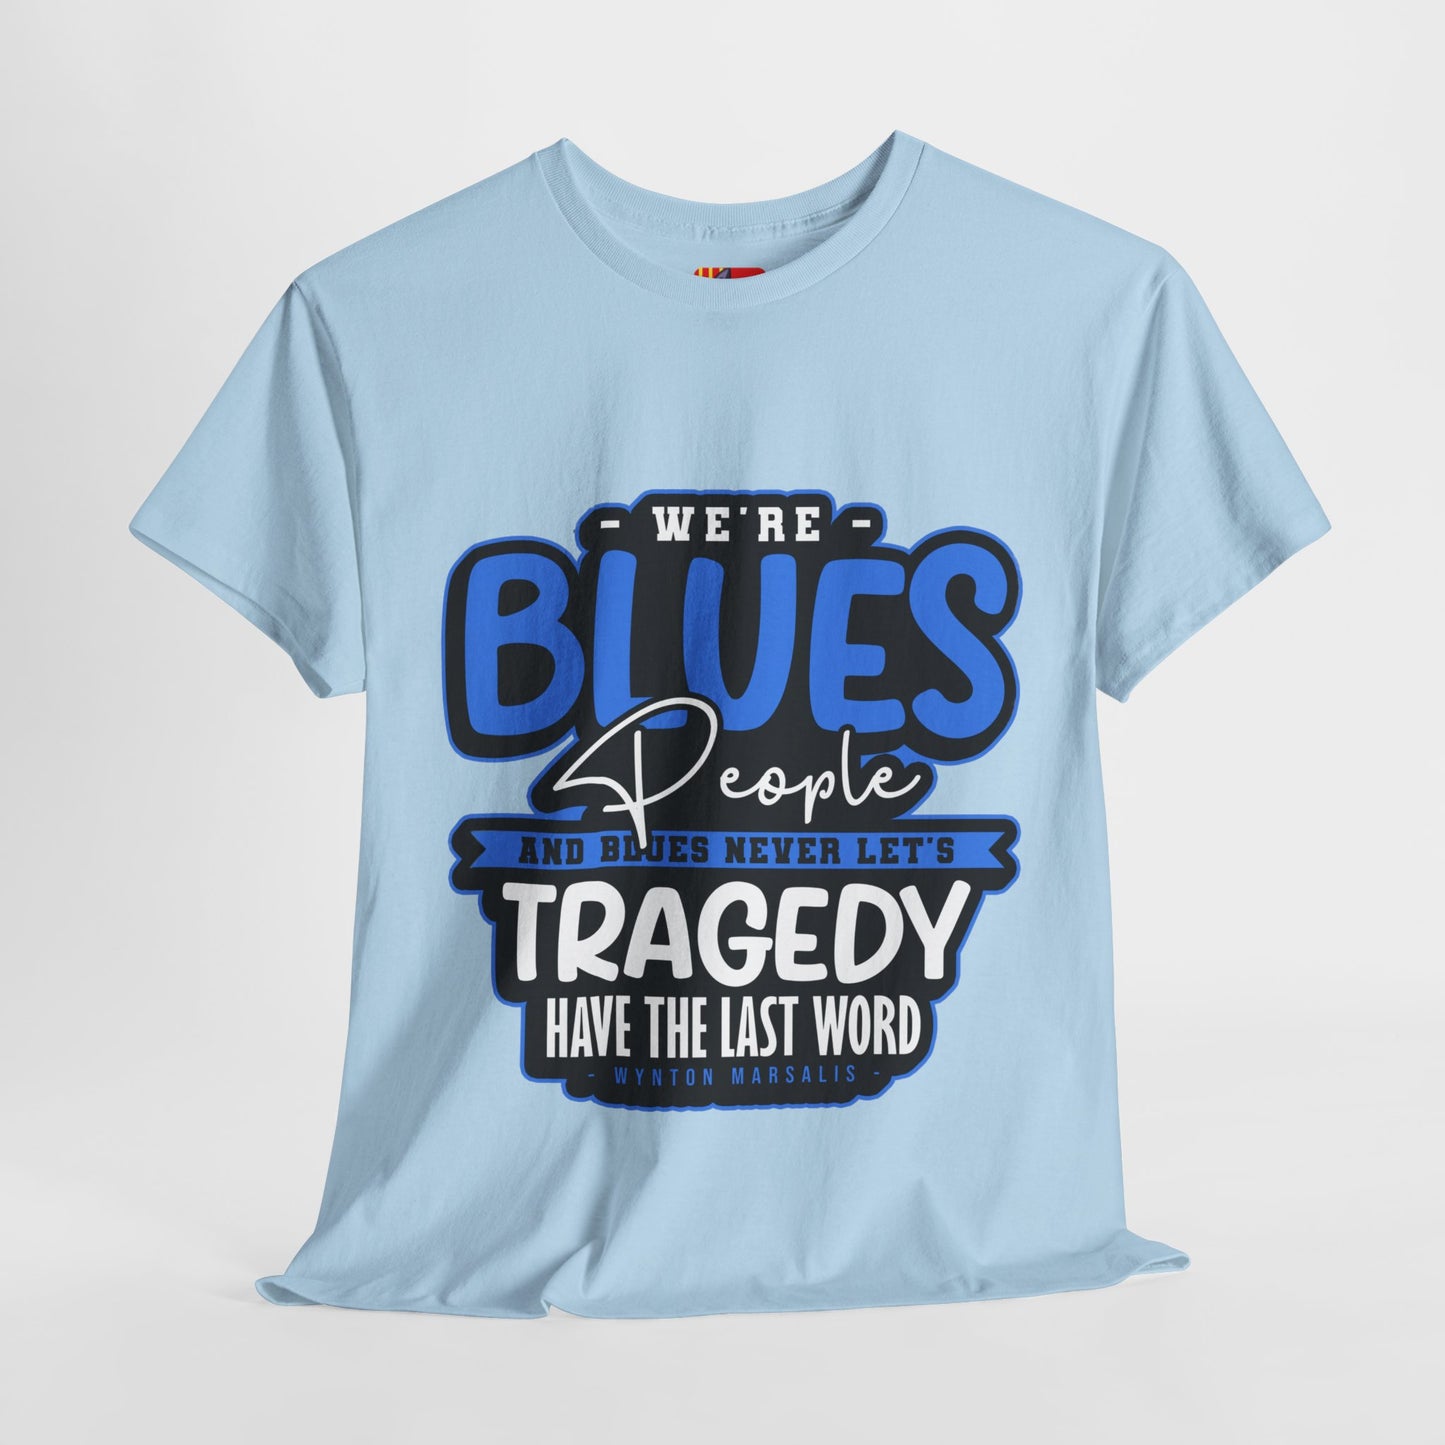 The Curious Mind T-Shirt: We're blues people